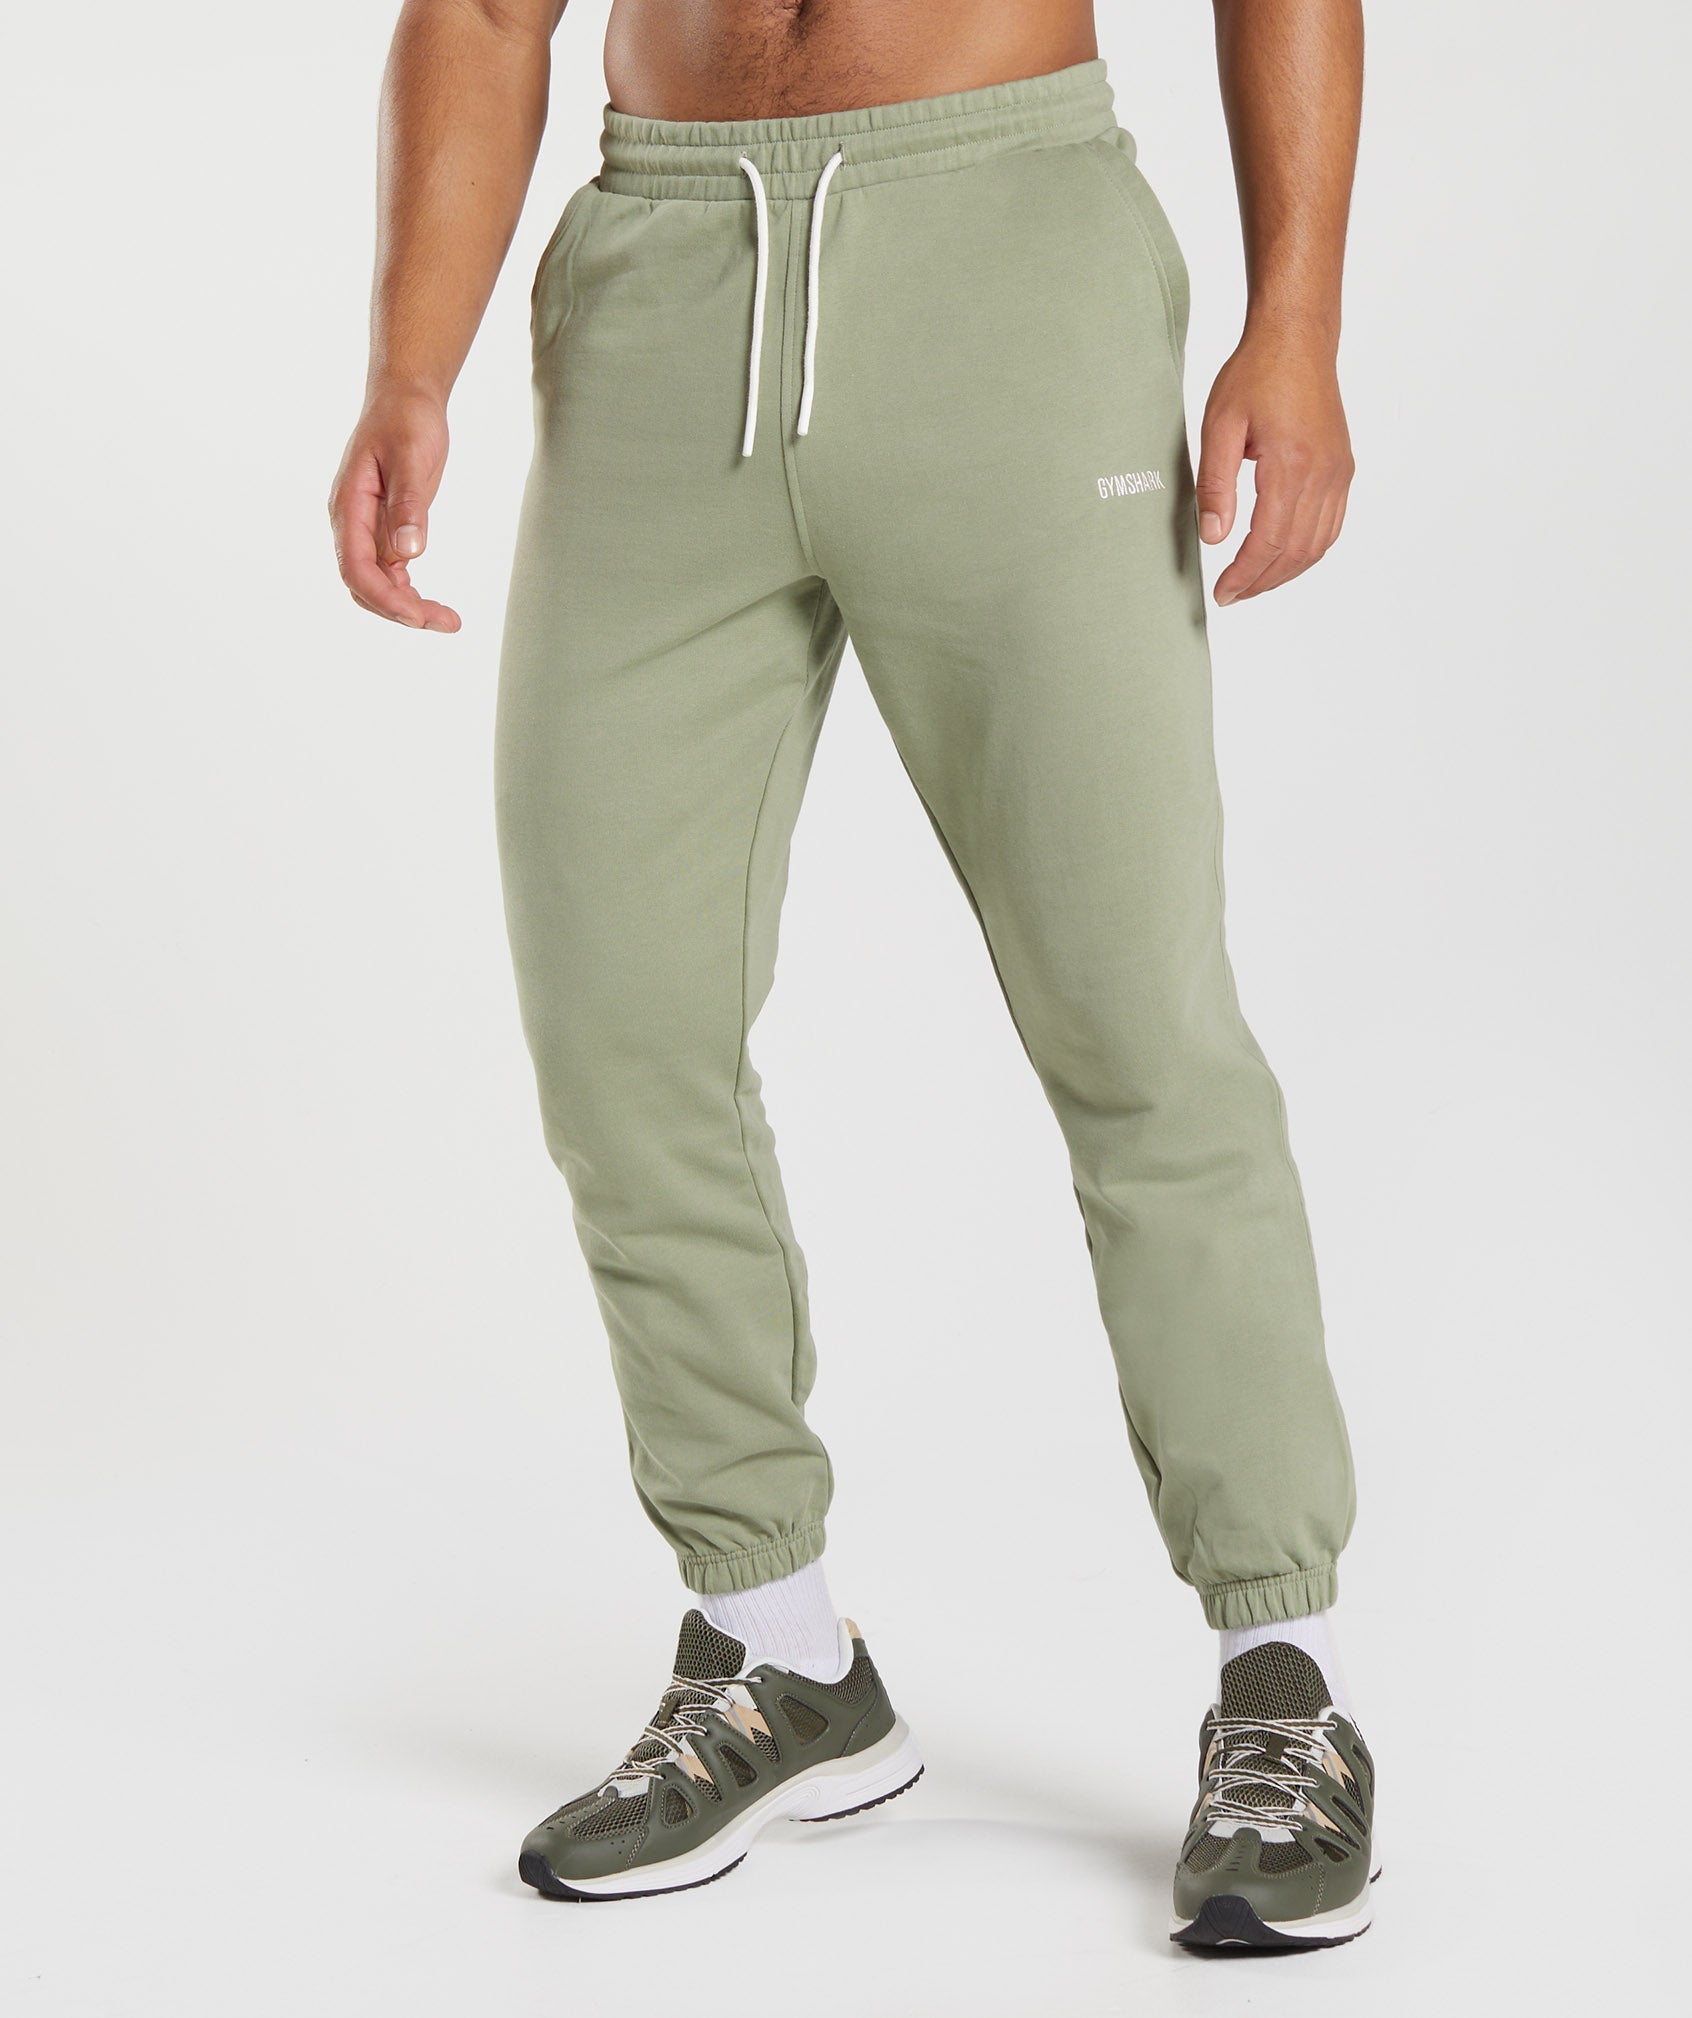 Rest Day Sweats Joggers in Sage Green - view 1